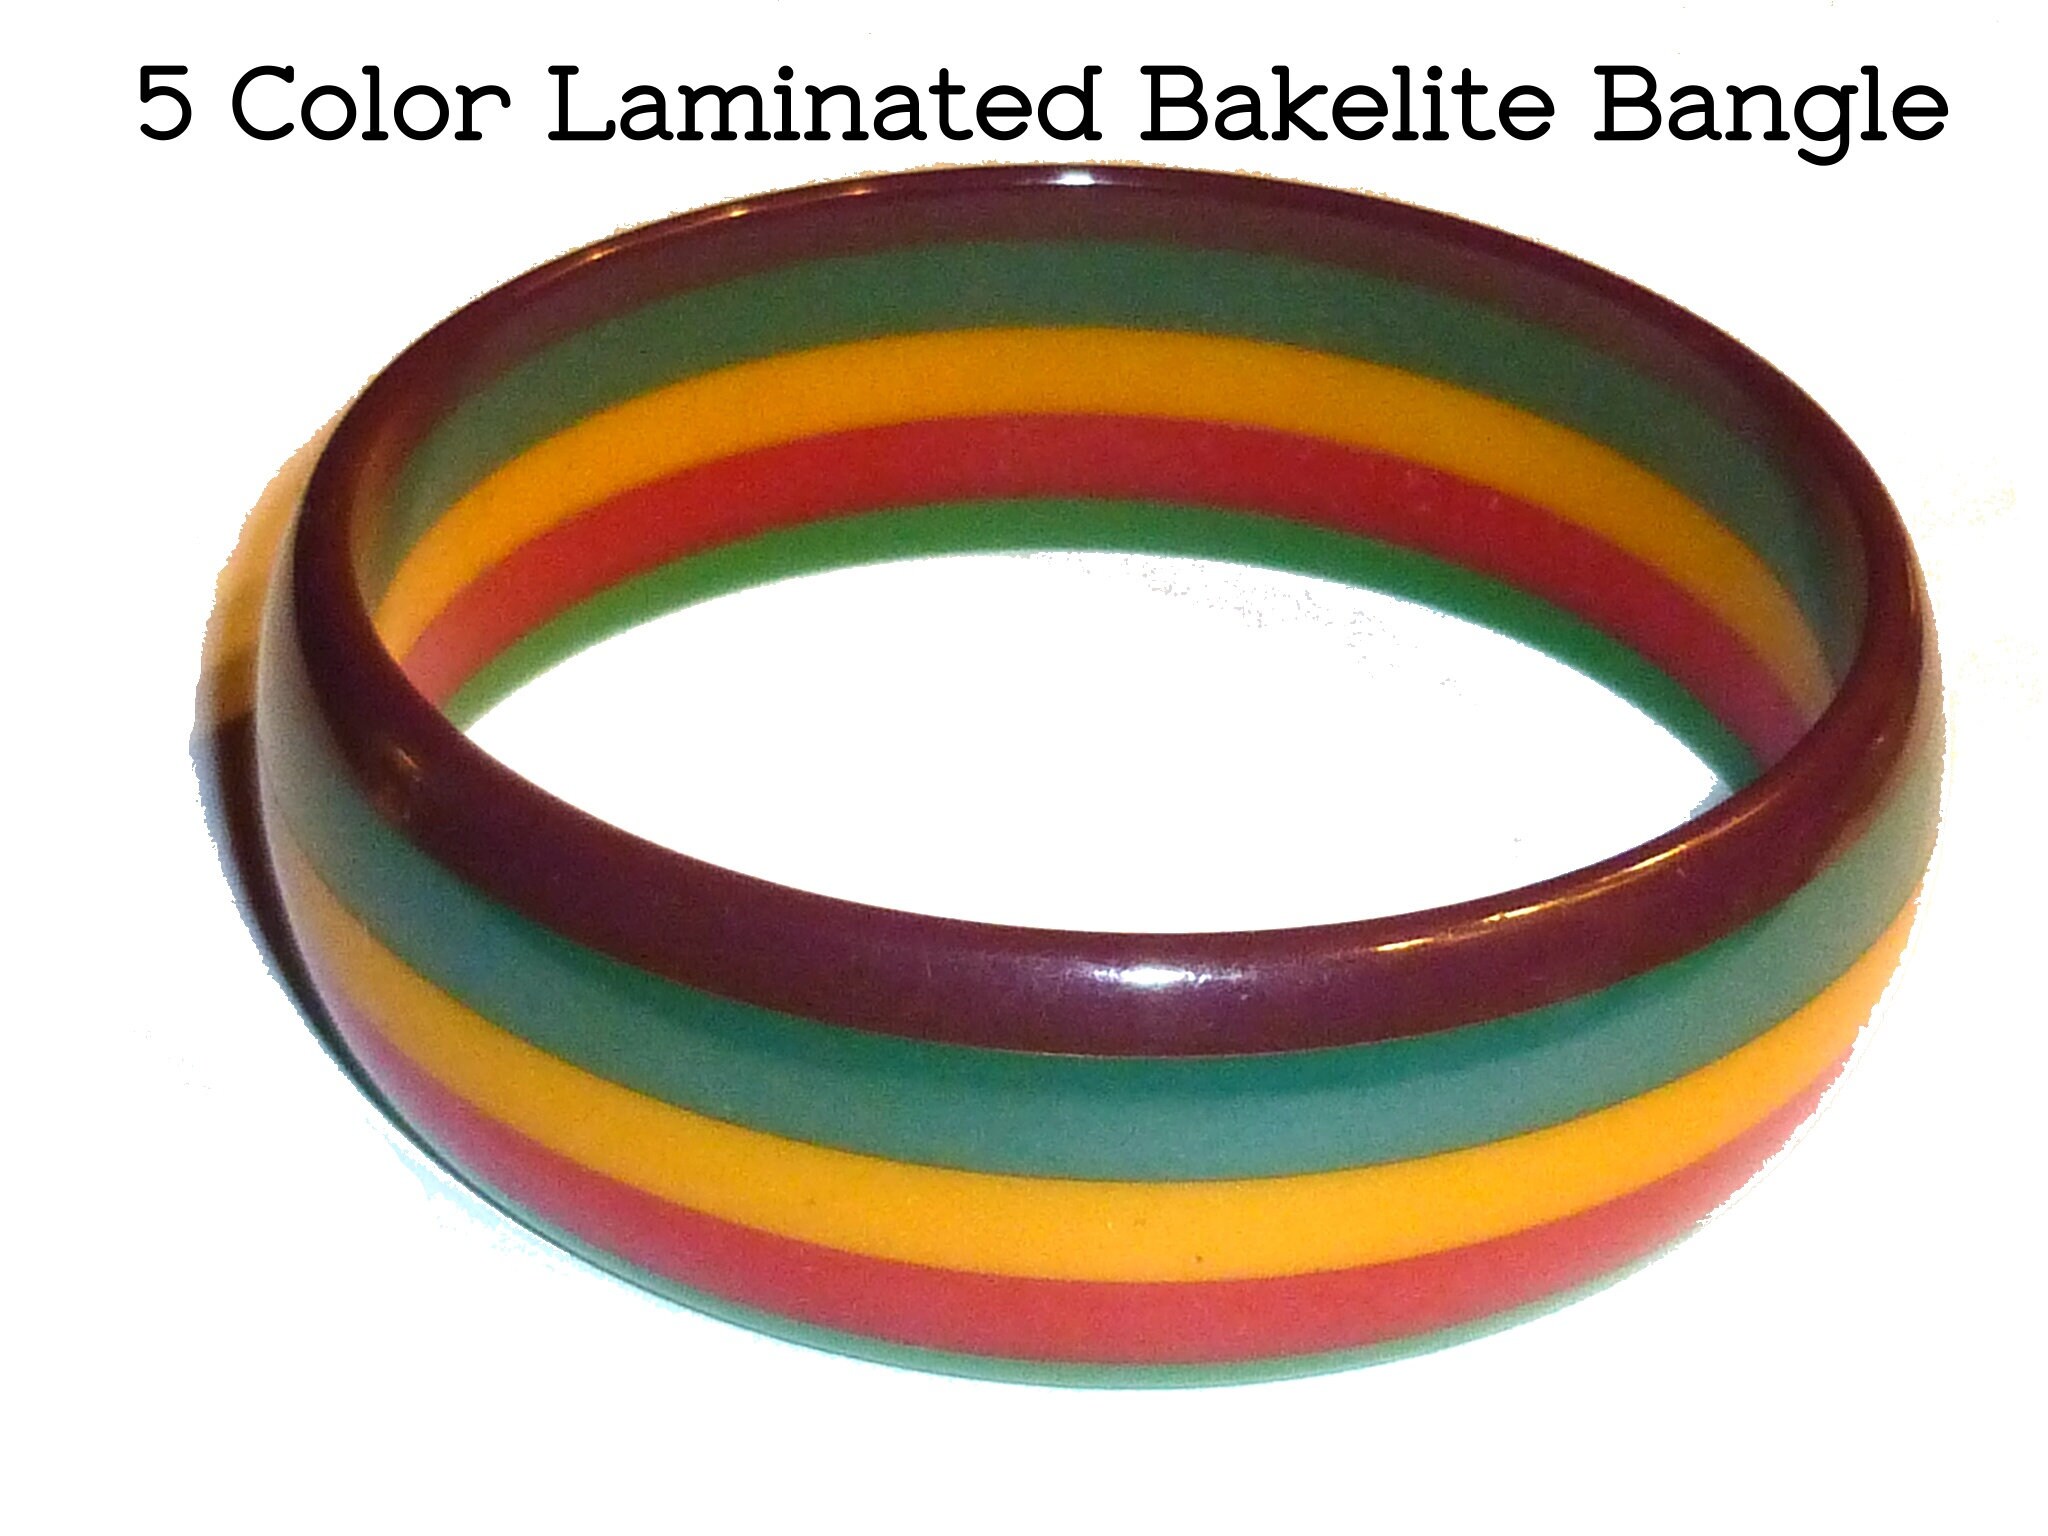 Bakelite Jewelry History and Recognizing Fakes